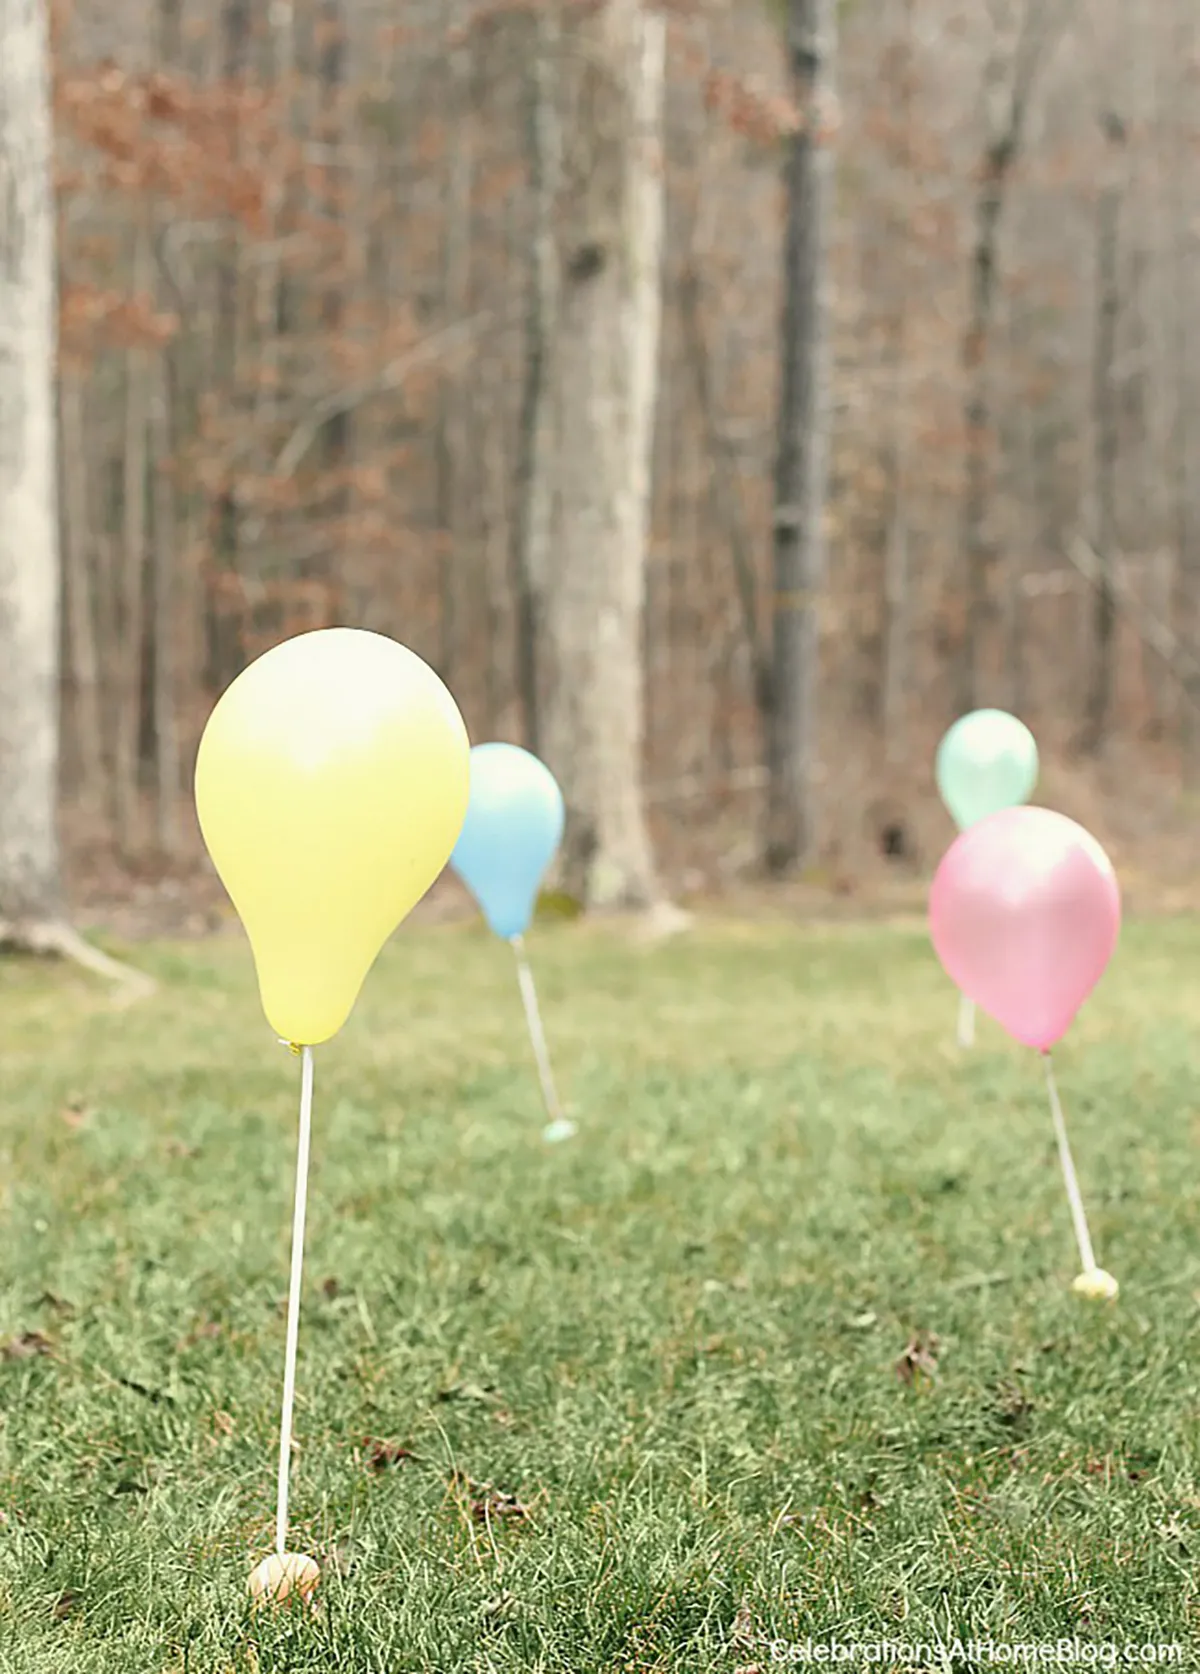 easter egg hunt ideas - toddlers balloons 2